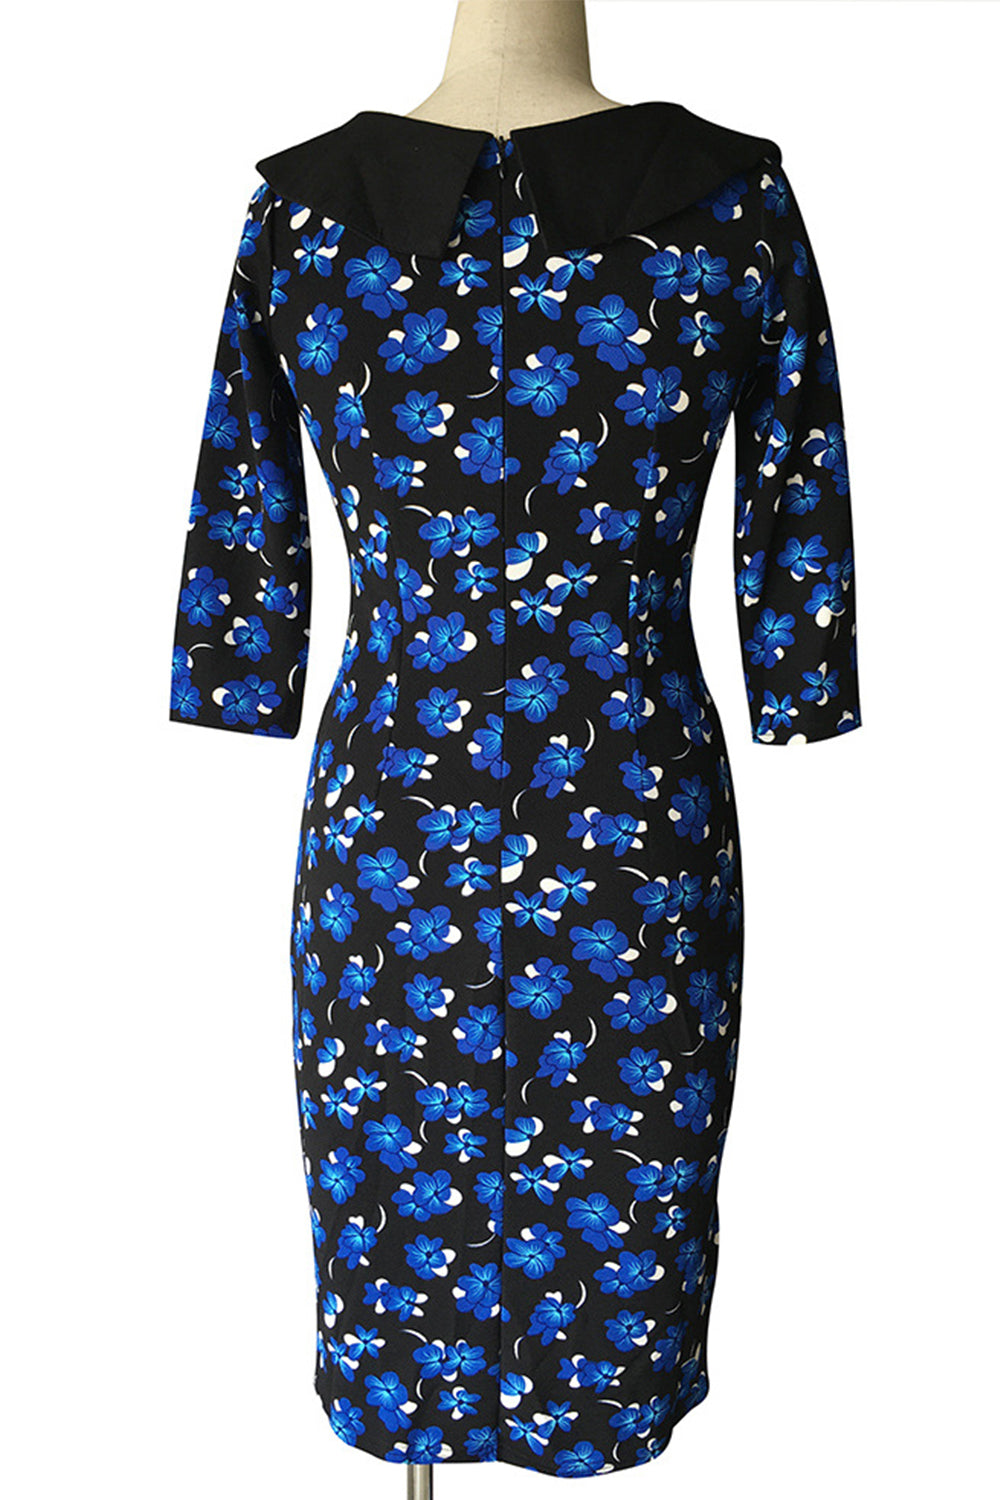 Ketty More Women Classic Blue Orchids Flowers Printed Bodycon Dress-KMWD370